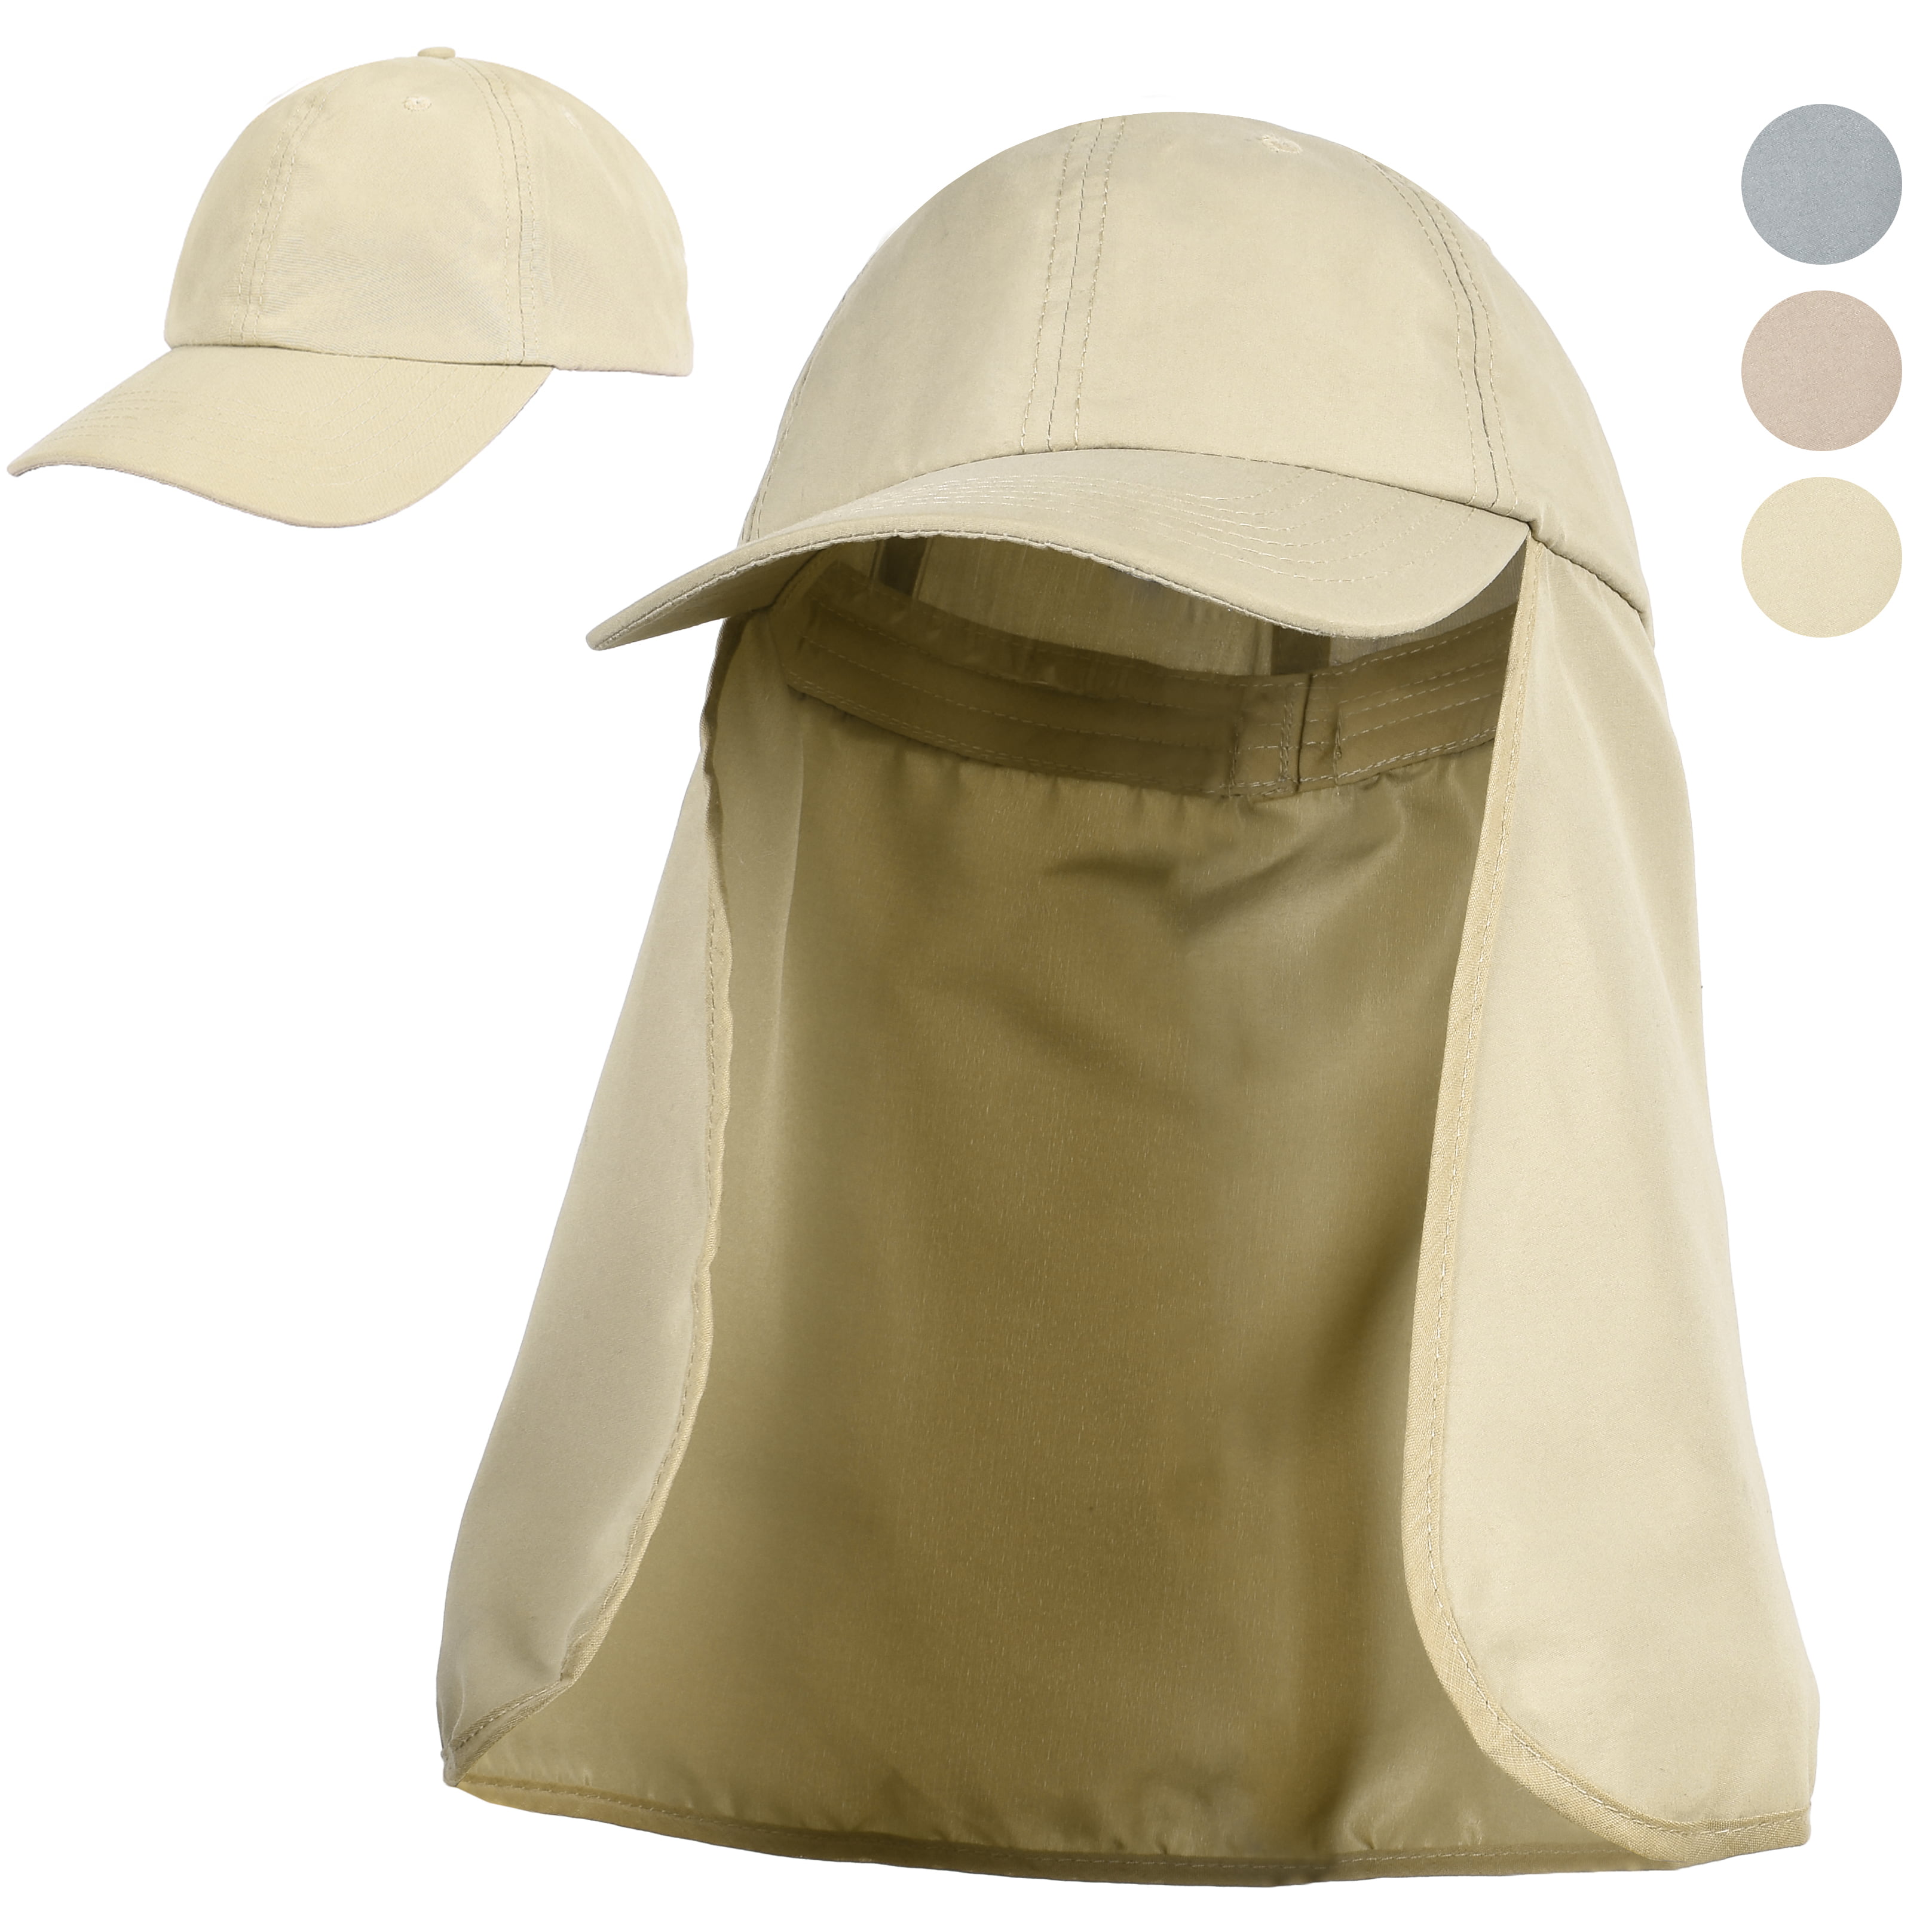 Wmcaps Outdoor Sun Hat for Men with 50+UPF Protection Safari Cap Wide Brim Fishing Hat with Neck Flap